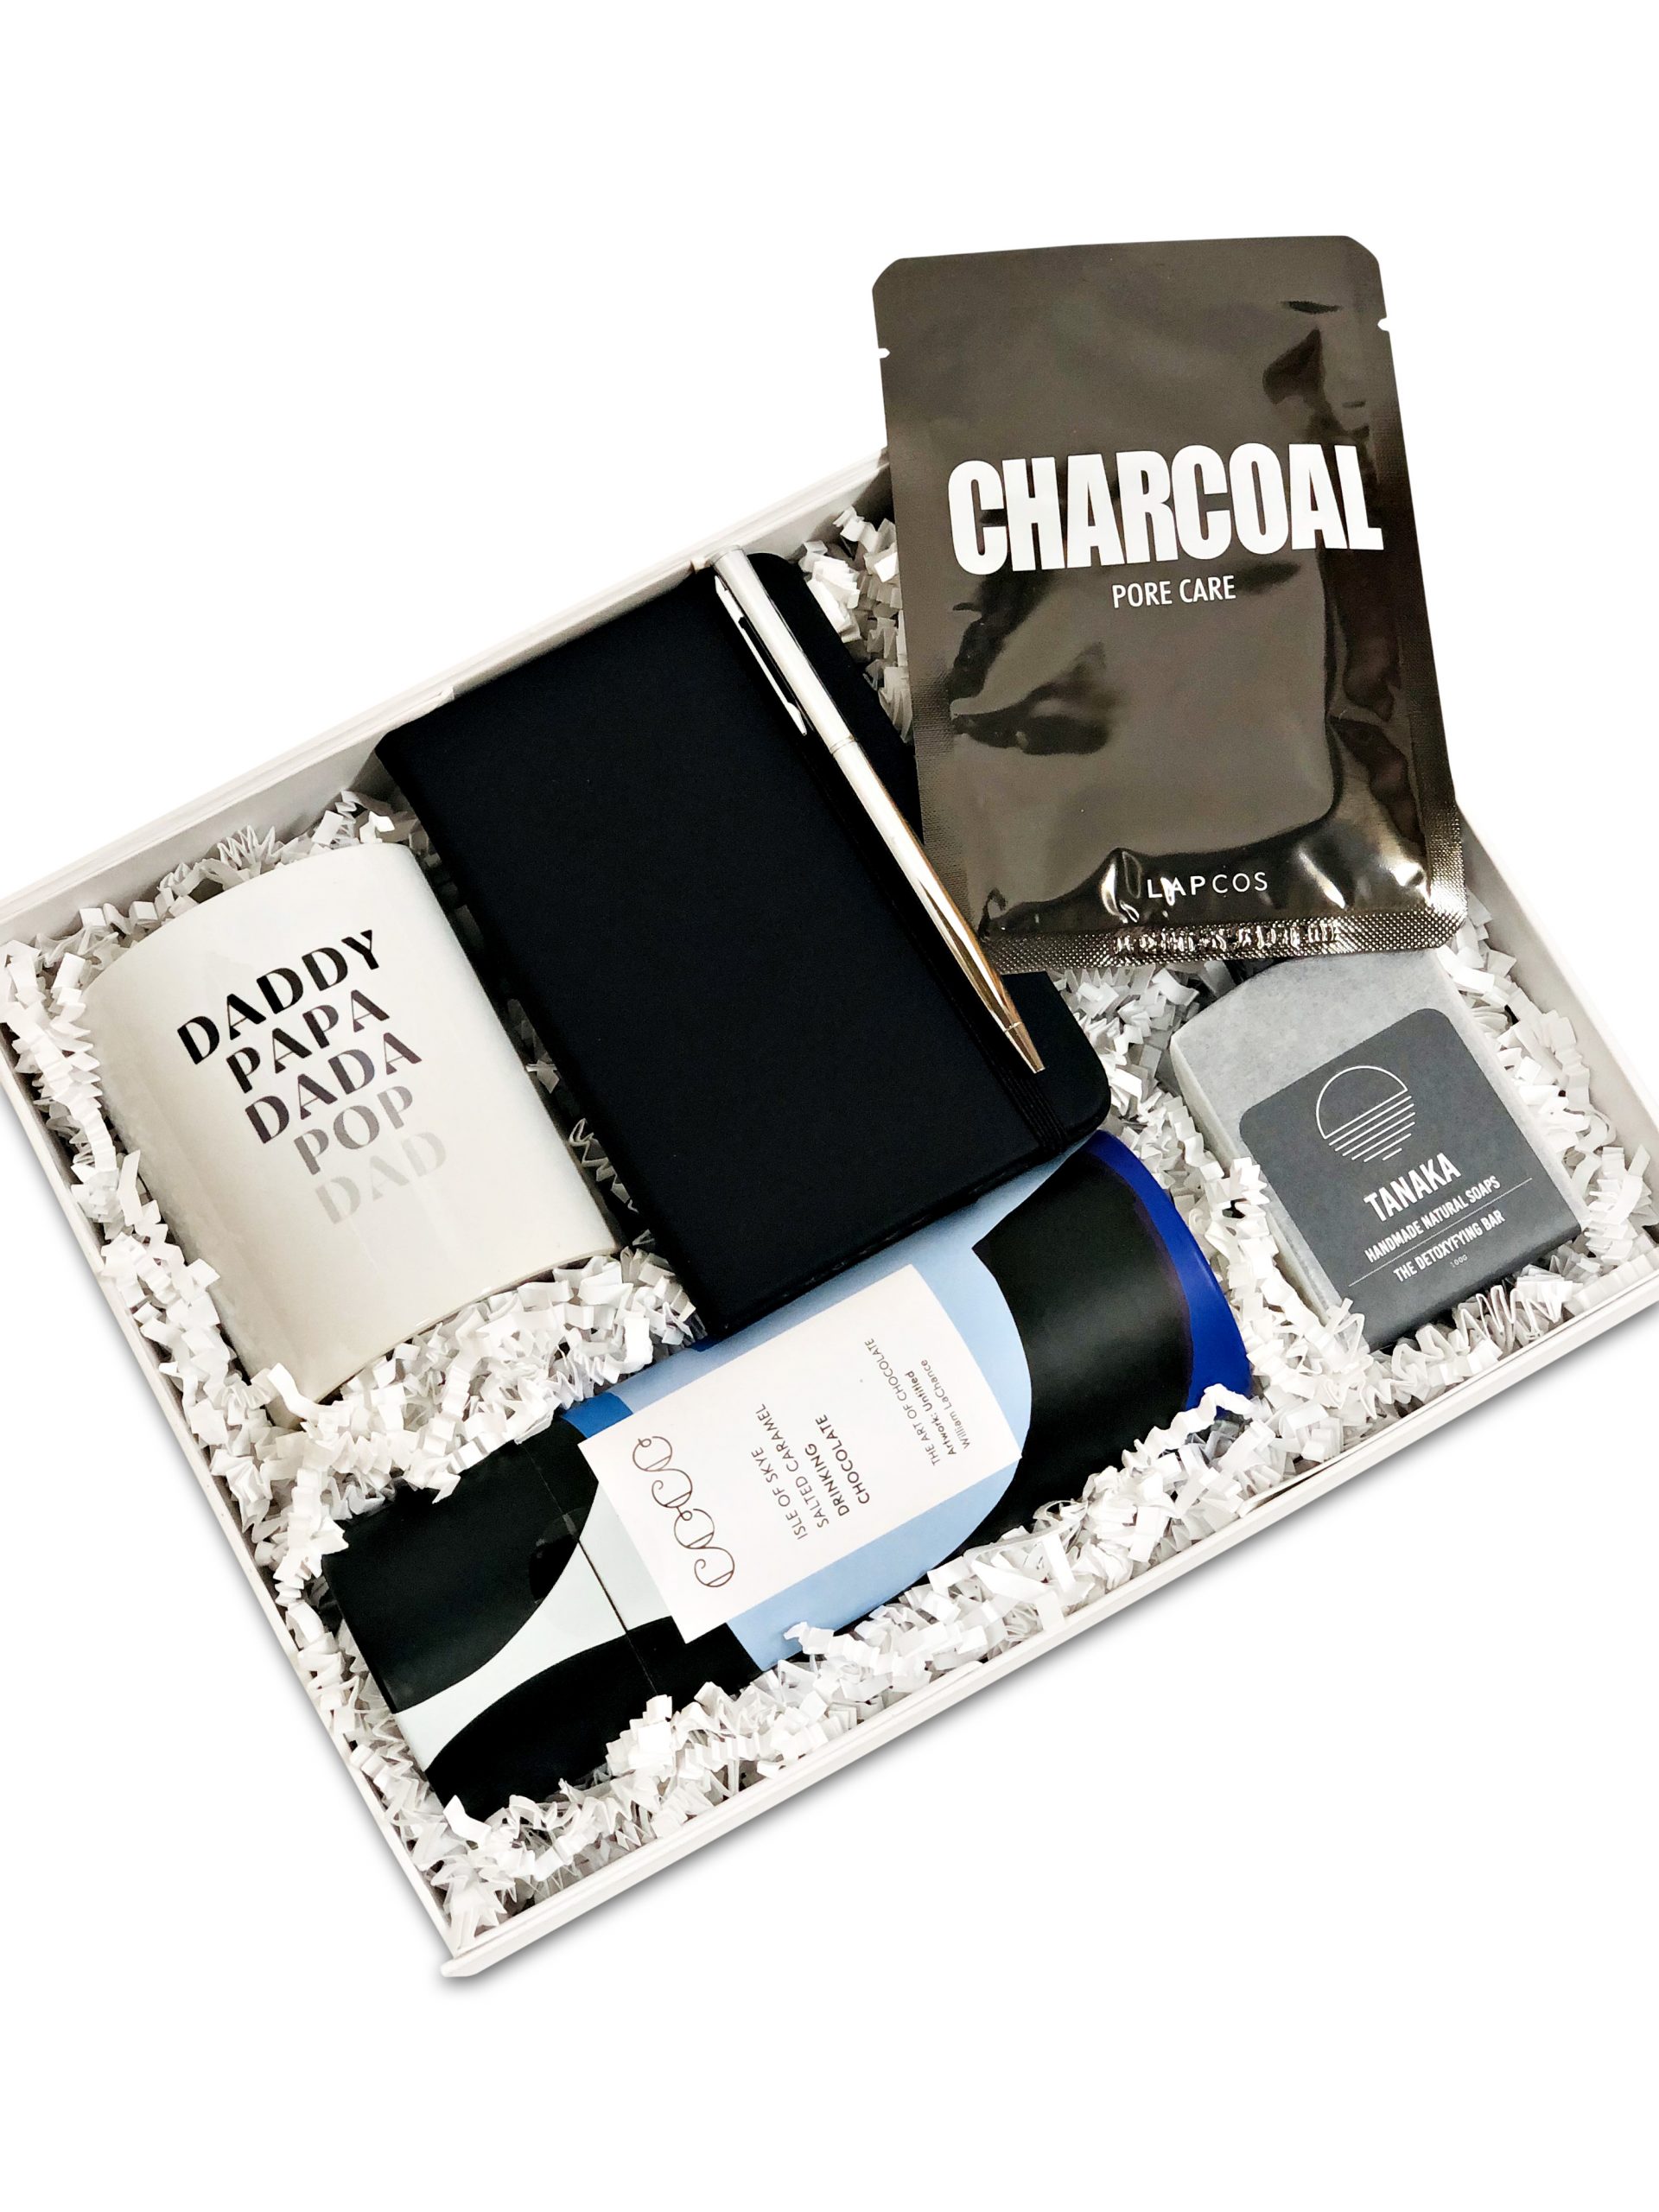 Gift box for guys with a mug for dad, charcoal soap, notebook and pen, face mask and luxury hot chocolate